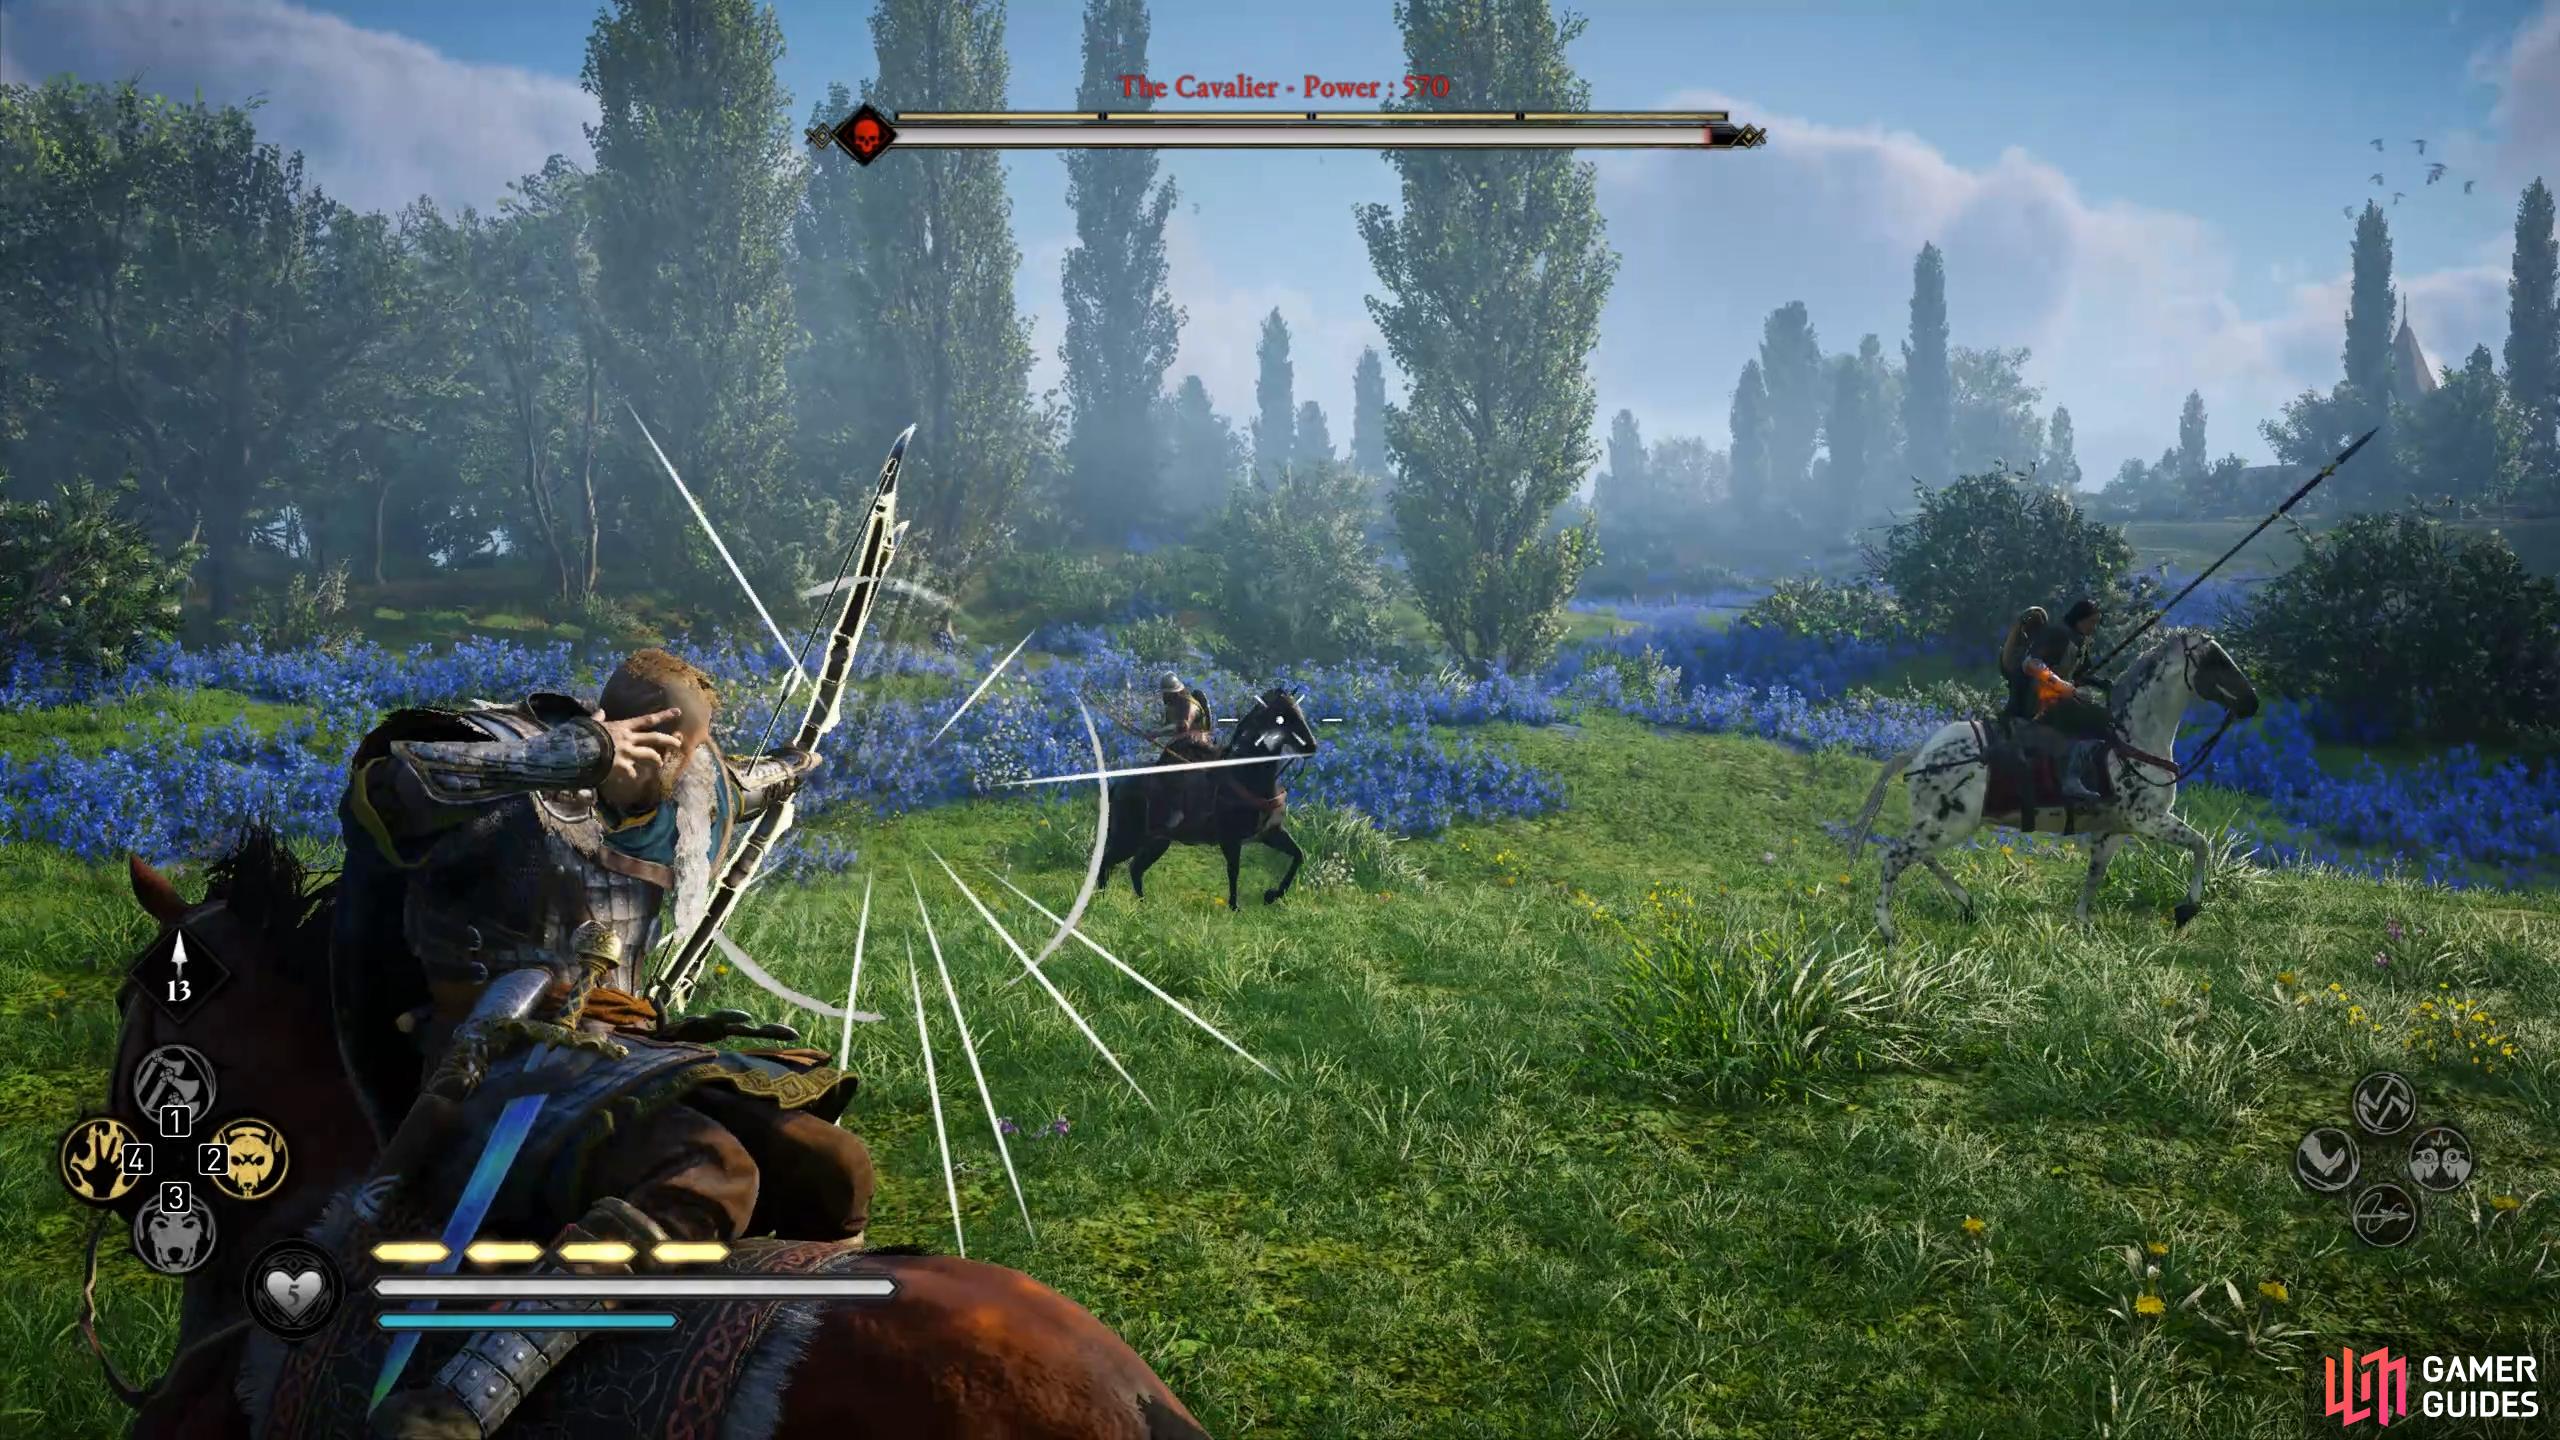 You can shoot the other mounted soldier from horseback if you're confident with your aim.